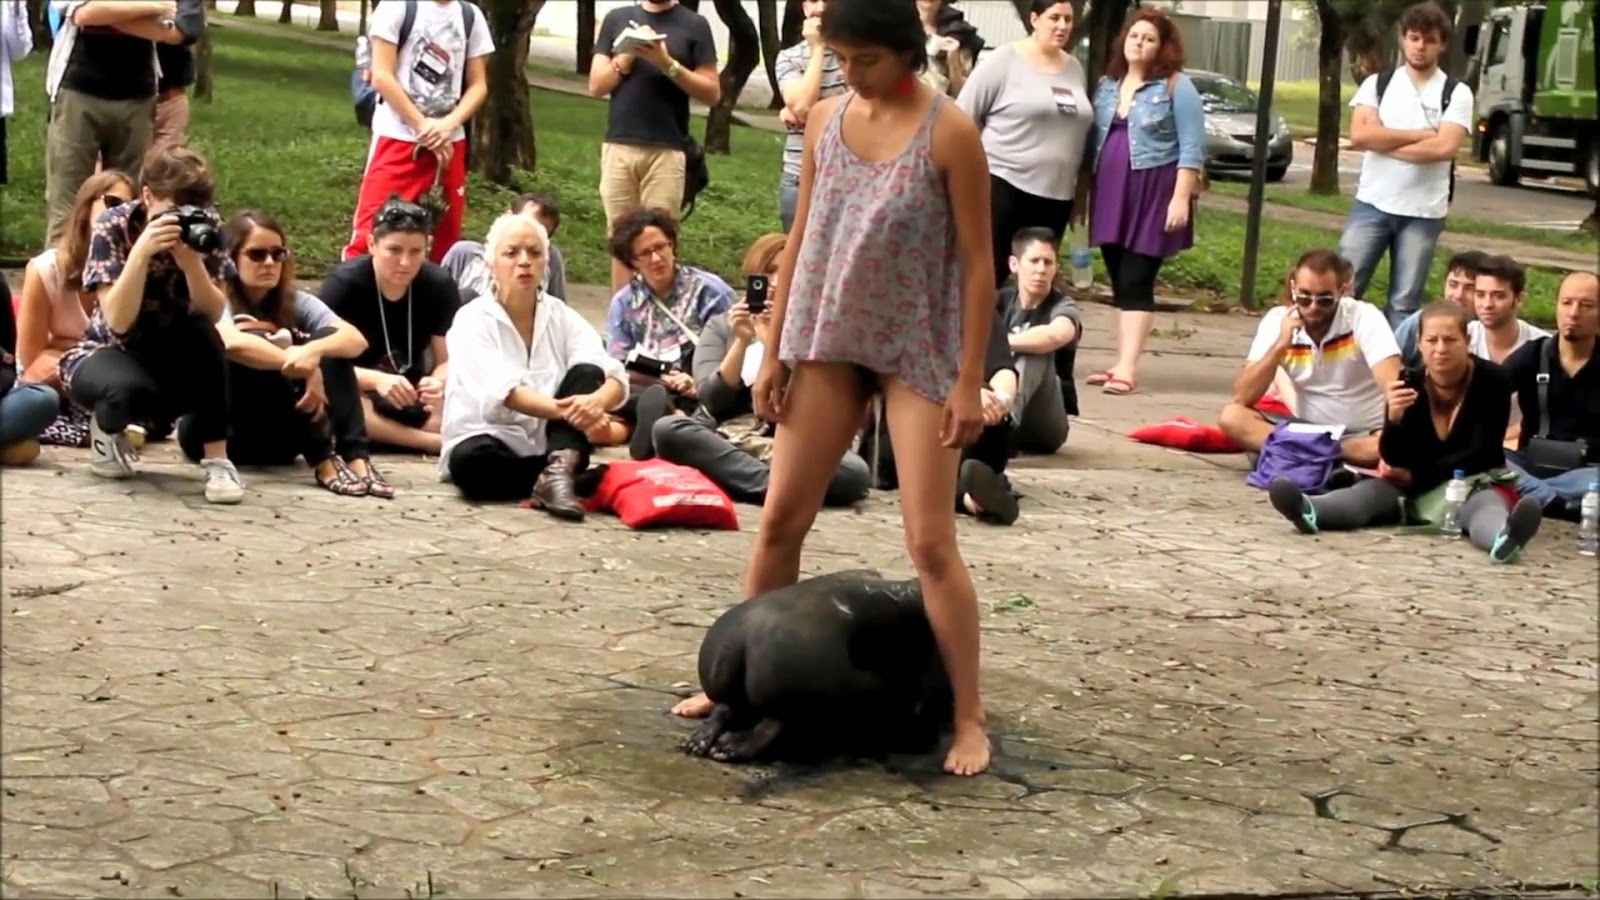 YTPeeClip0509: This is art - peeing on another girl 